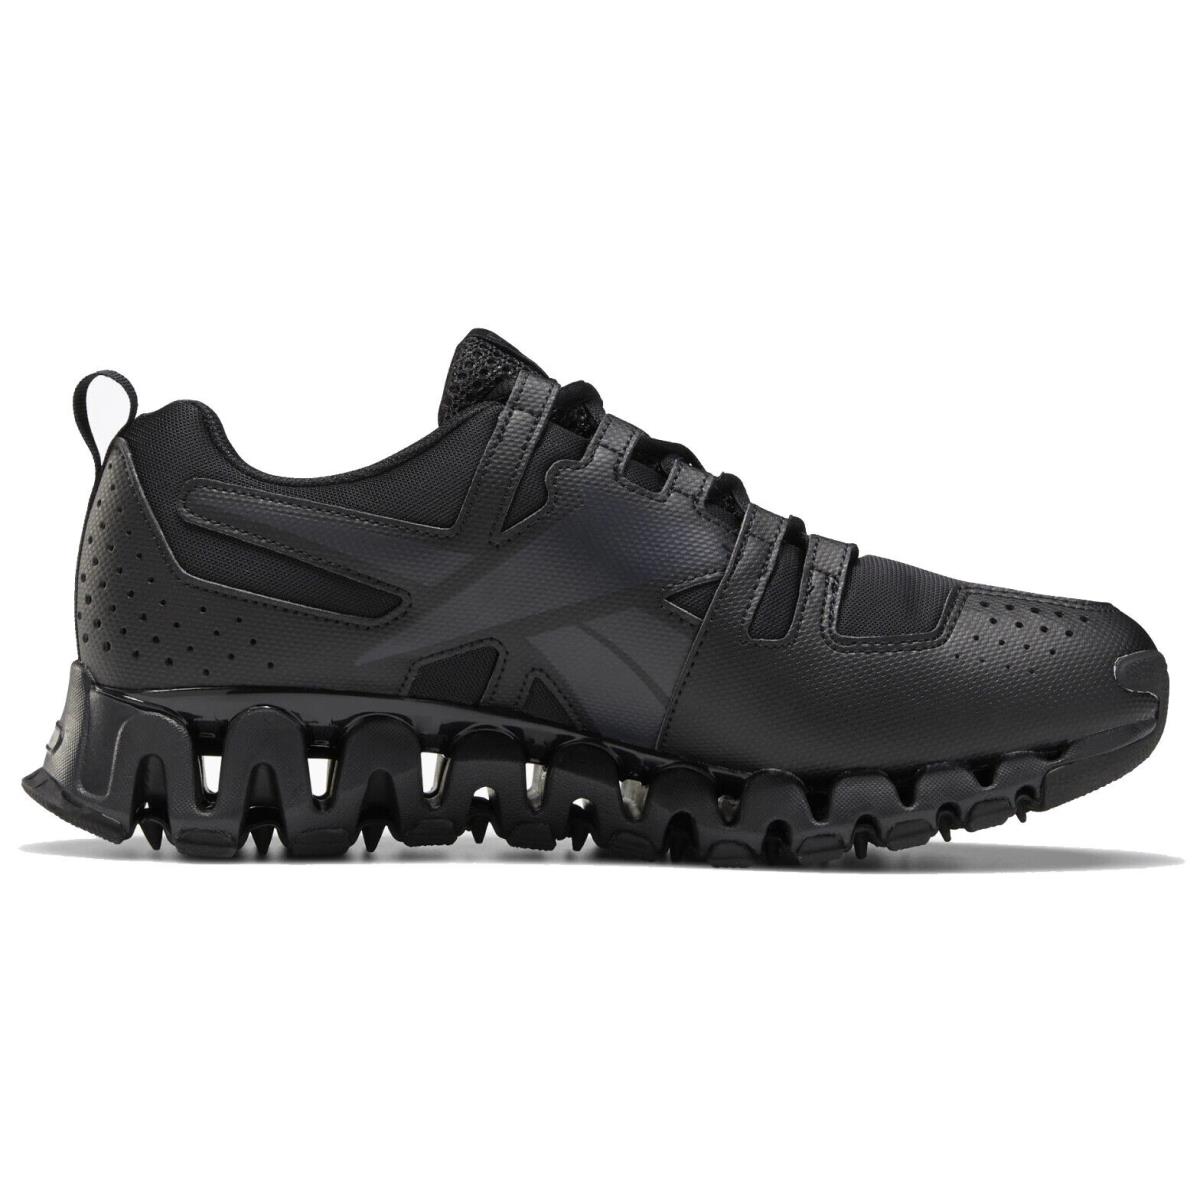 Reebok Zigwild Trail 6 Men`s Running Lightweight Breathable Shoes Sneakers Black / Cold Grey 7 / Ftwr White